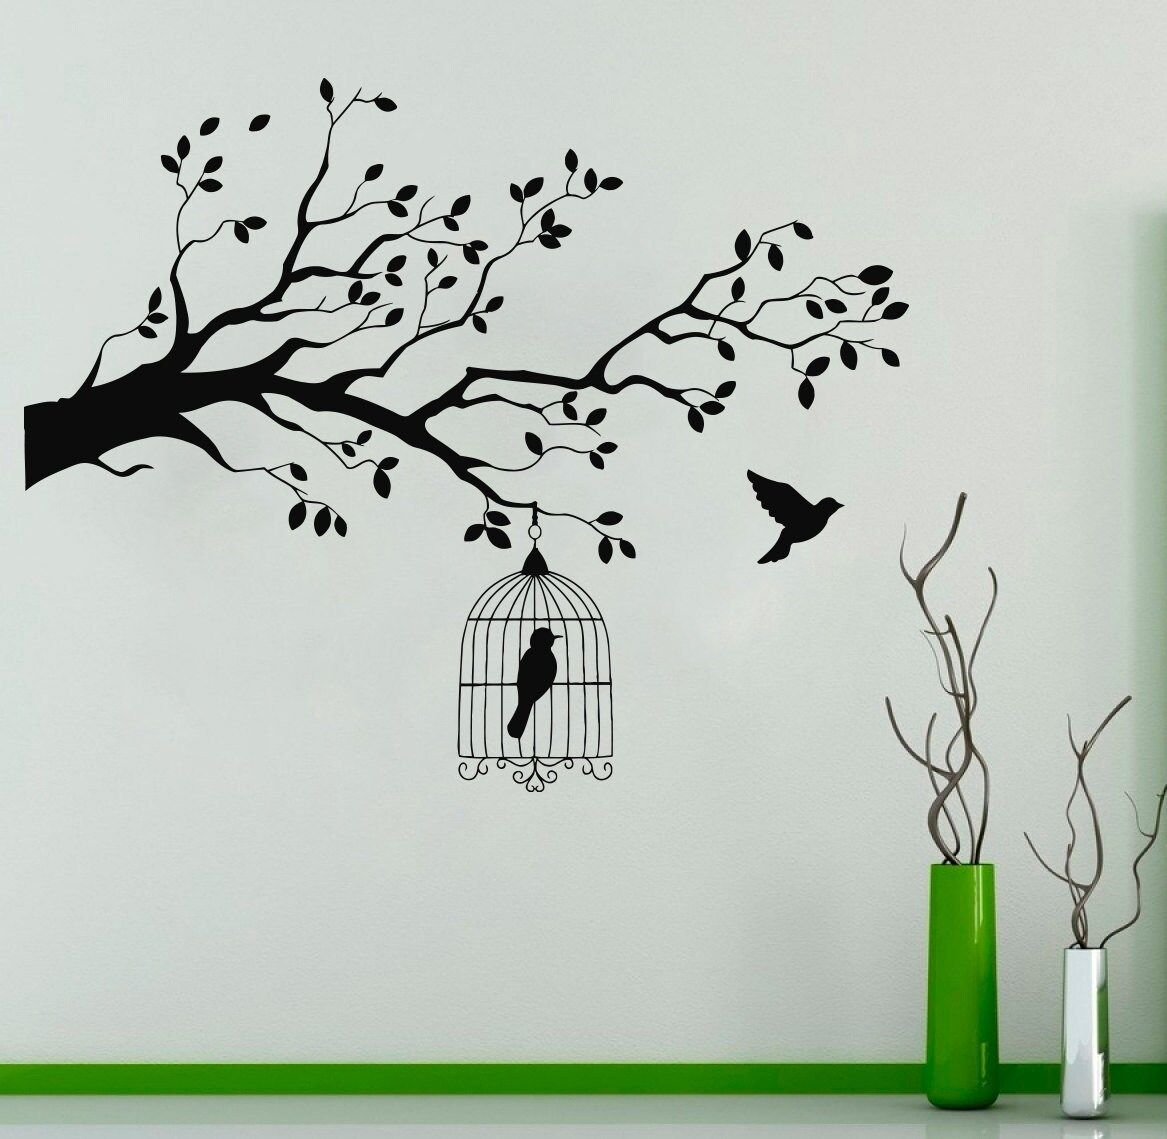 Pen drawing: A drawing of a bird on a tree branch. | PeakD